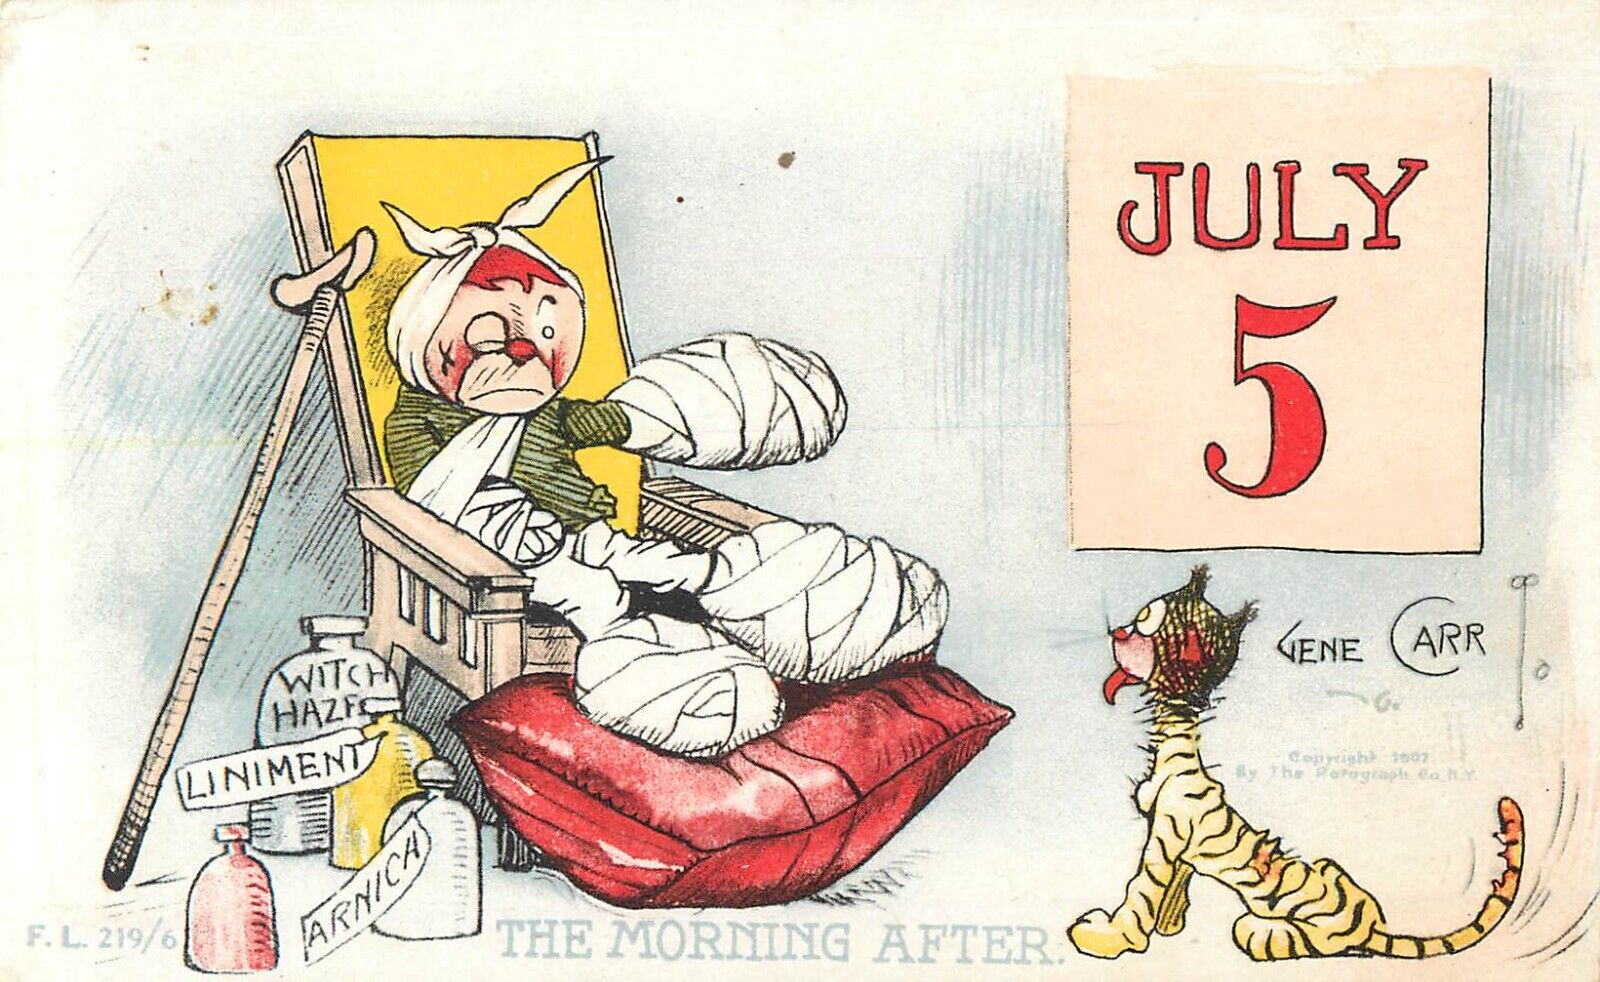 S/A Postcard Gene Carr 4th Of July Bandaged Child and Cat on July 5th, 219/6